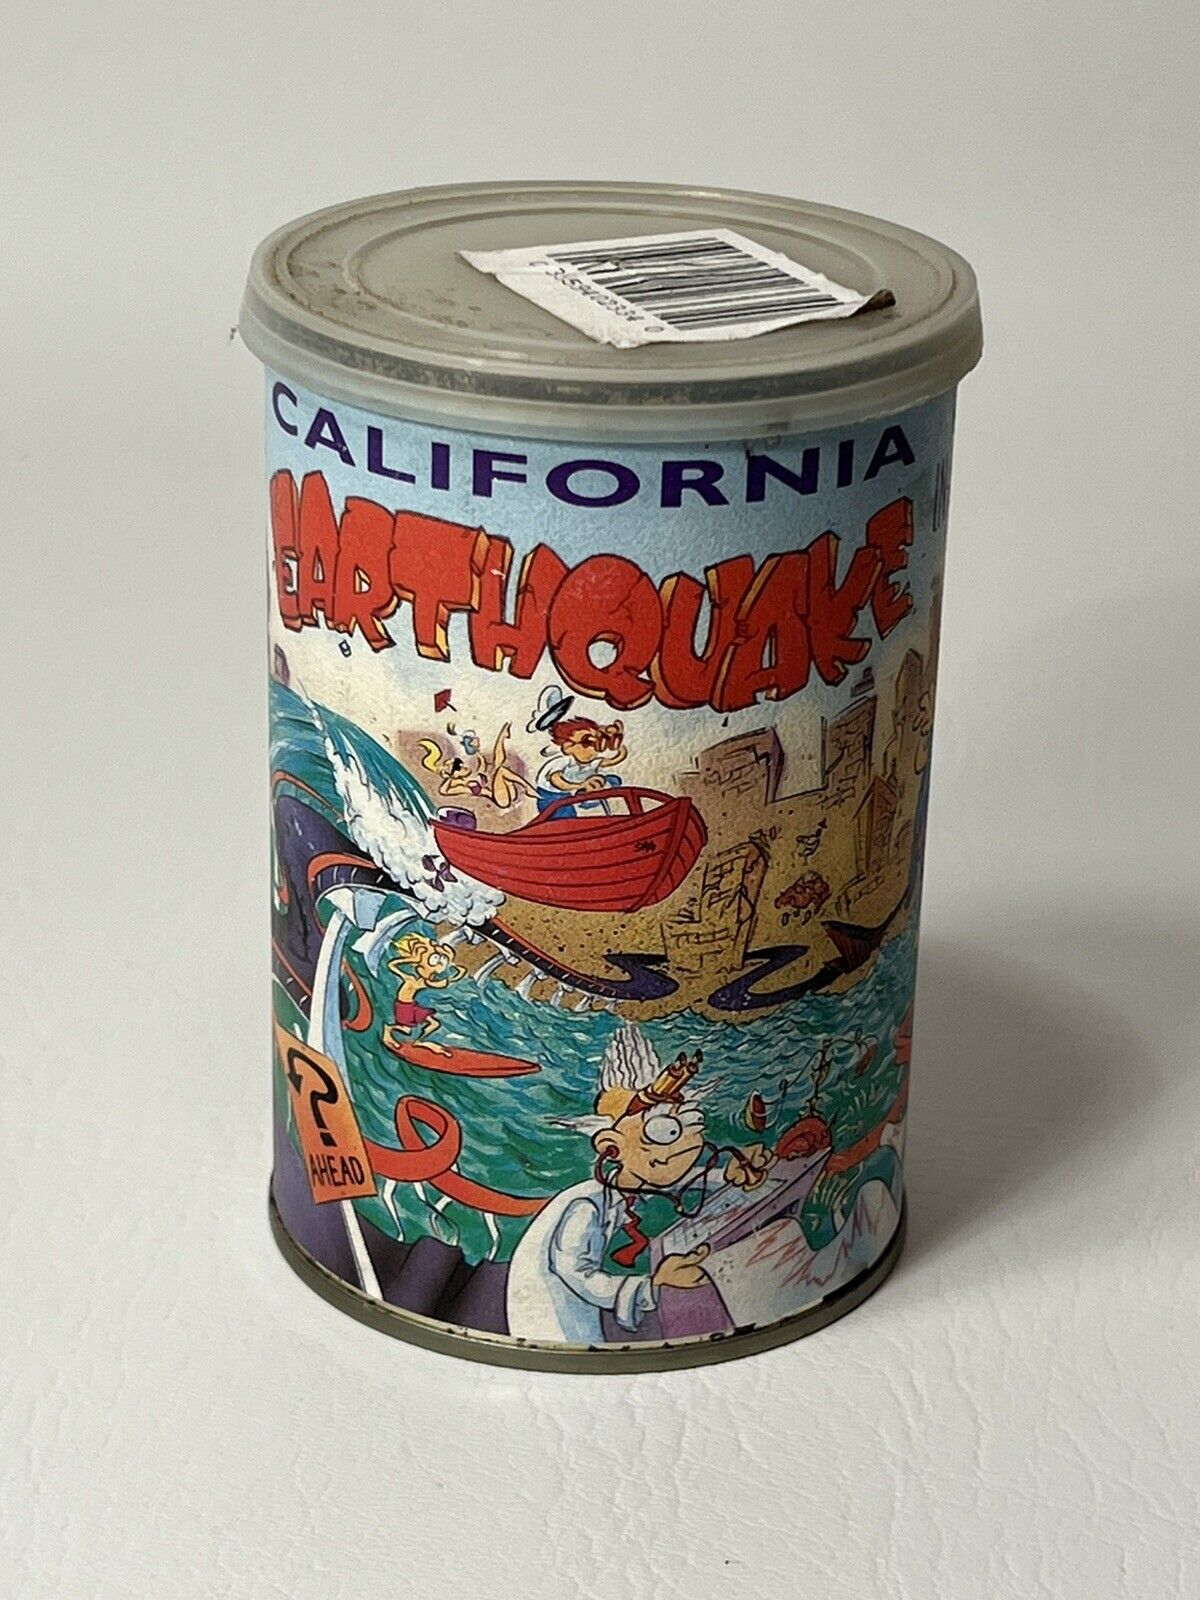 Vintage Genuine California Earthquake In a Can Novelty Souvenir Tested